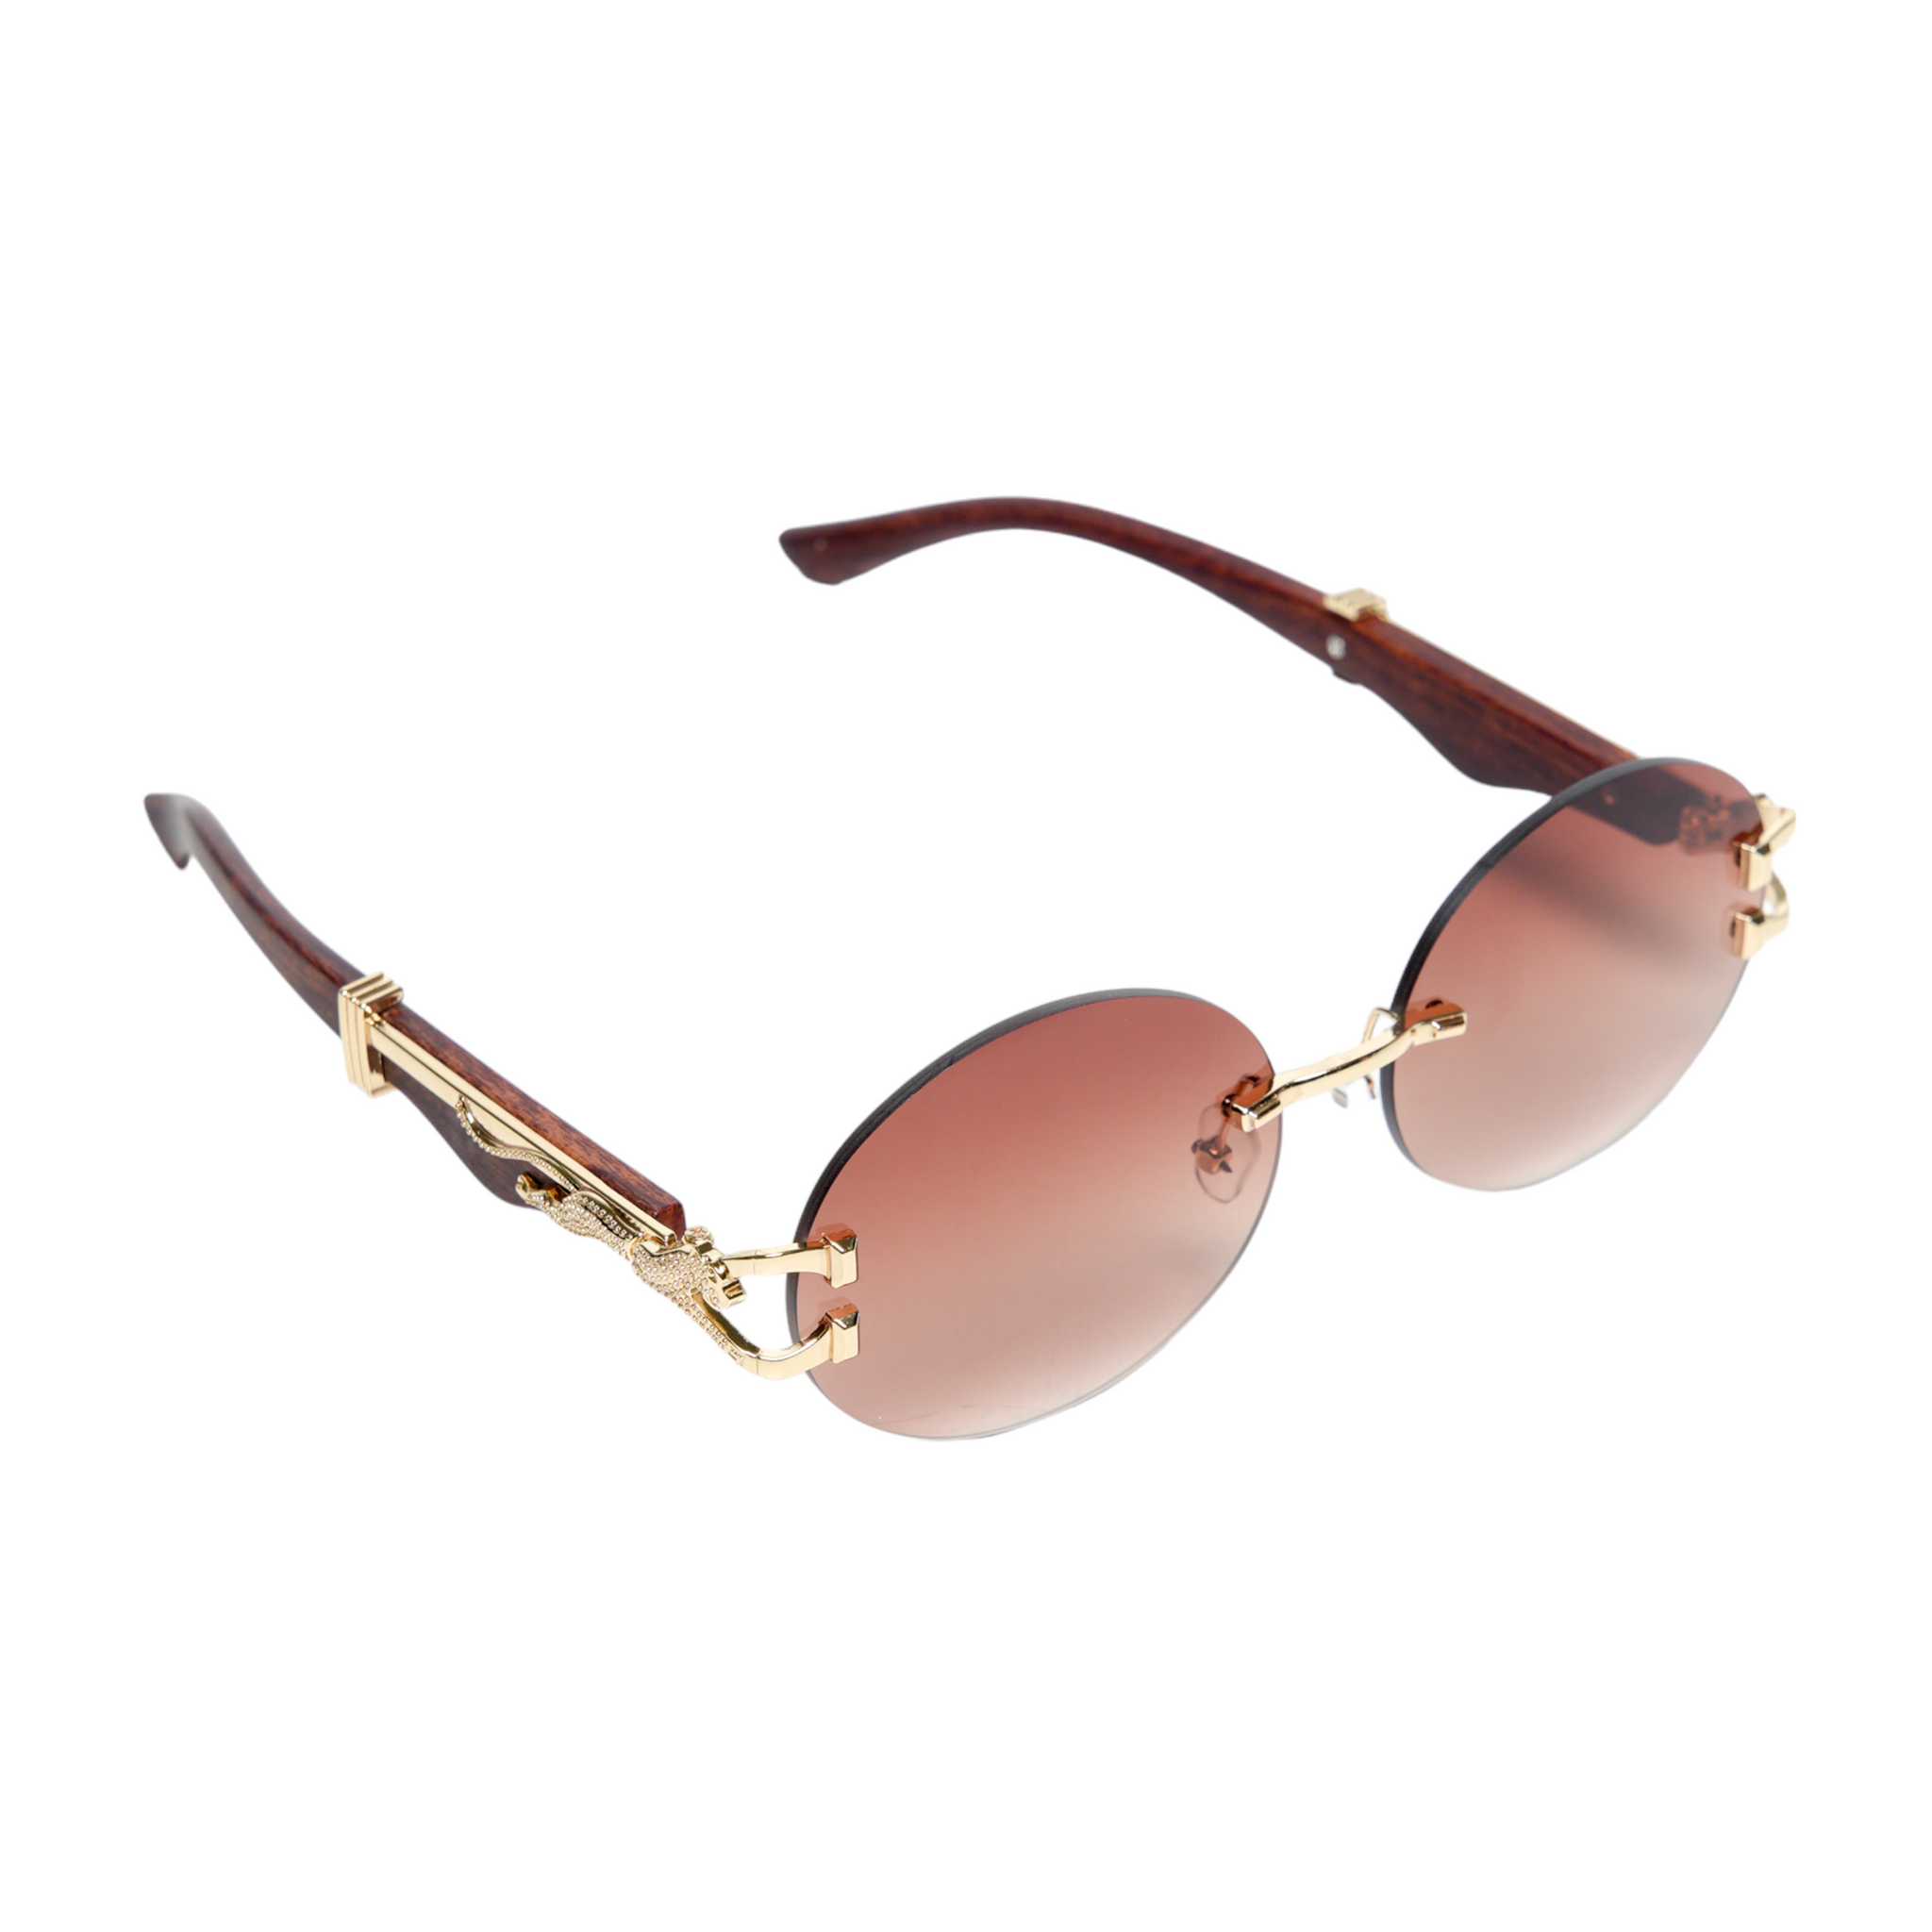 Chokore Leopard-design Rimless Sunglasses with Wooden Temples (Brown)